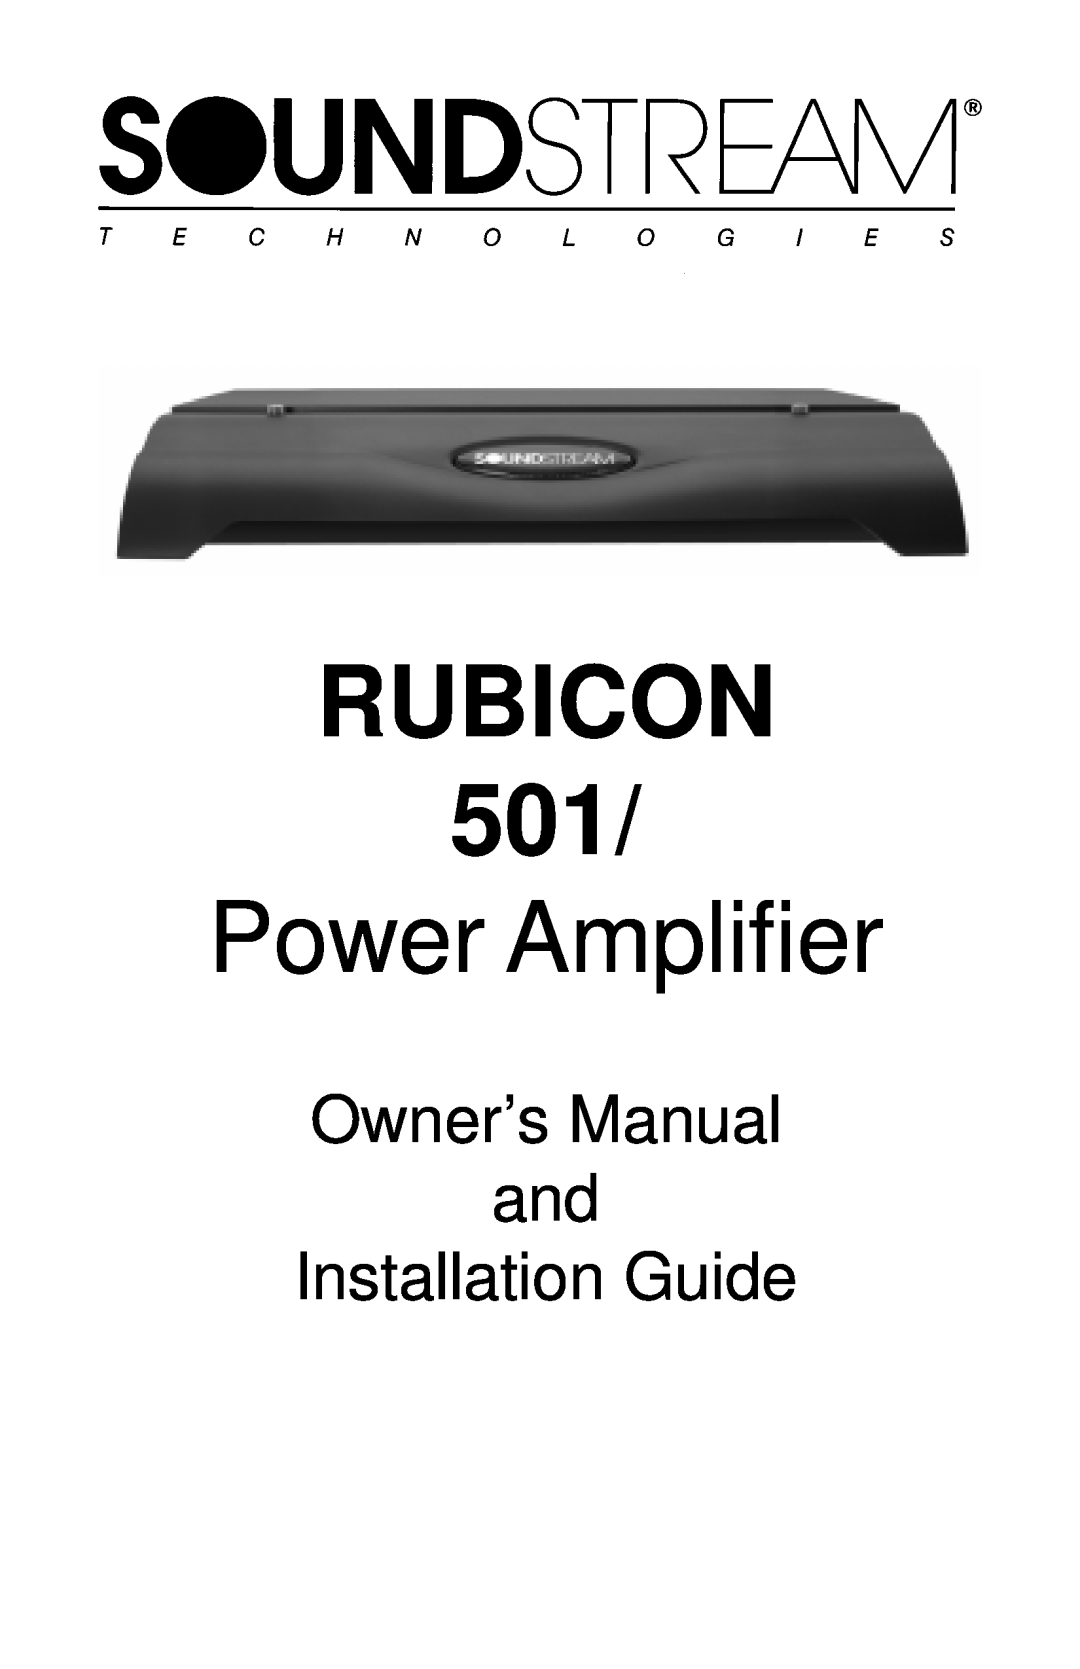 Soundstream Technologies 501 owner manual Rubicon, Power Amplifier 